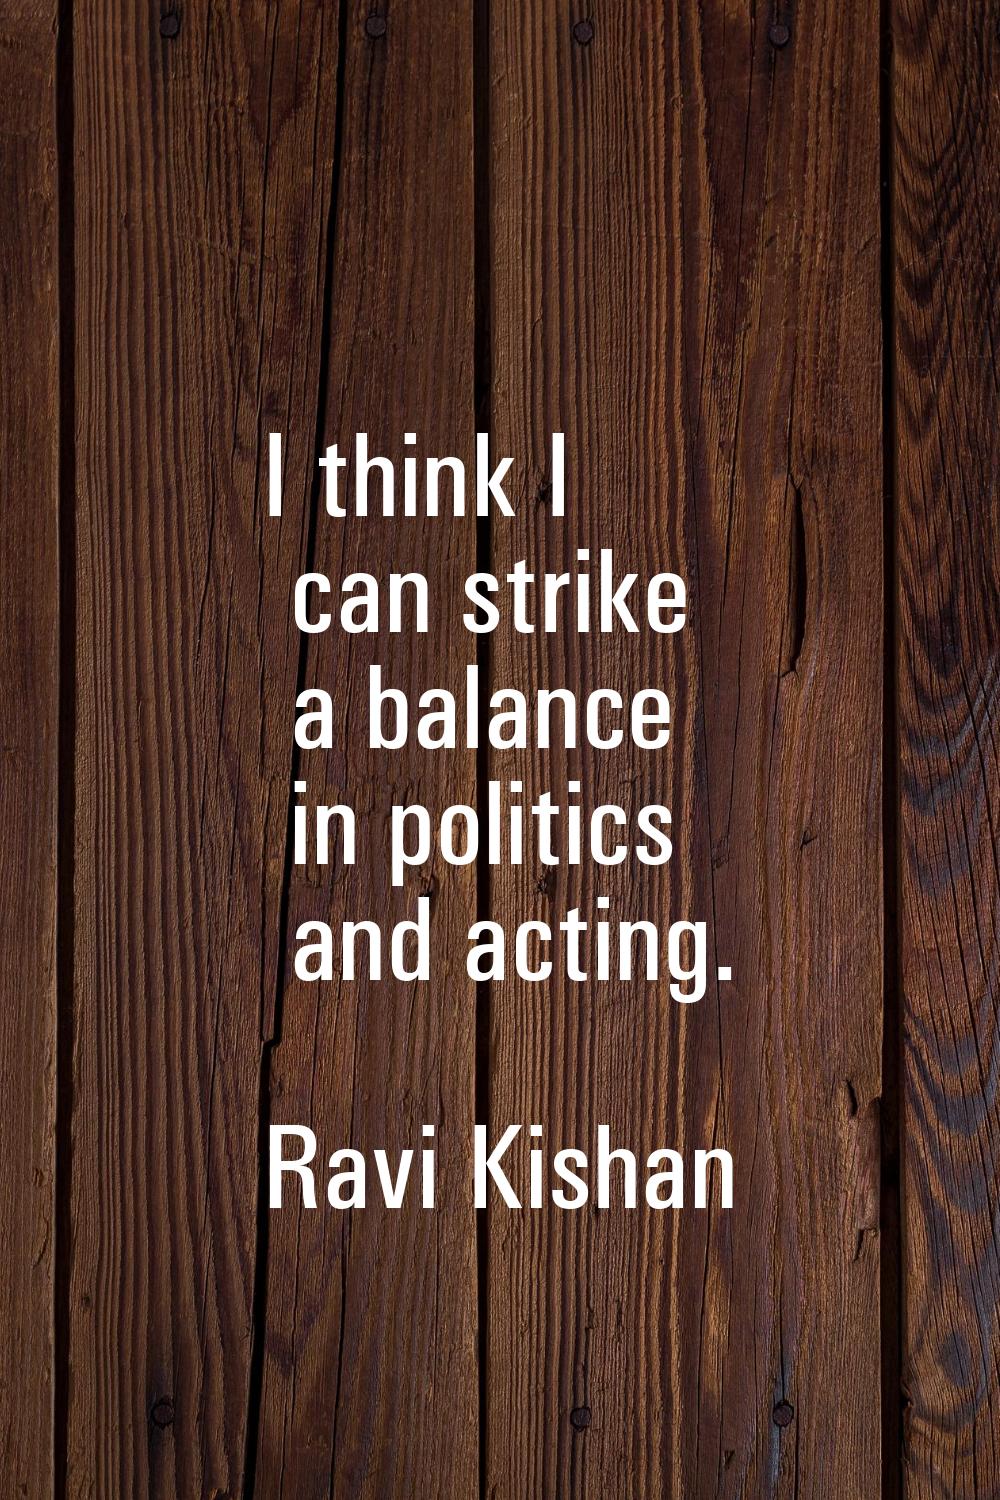 I think I can strike a balance in politics and acting.